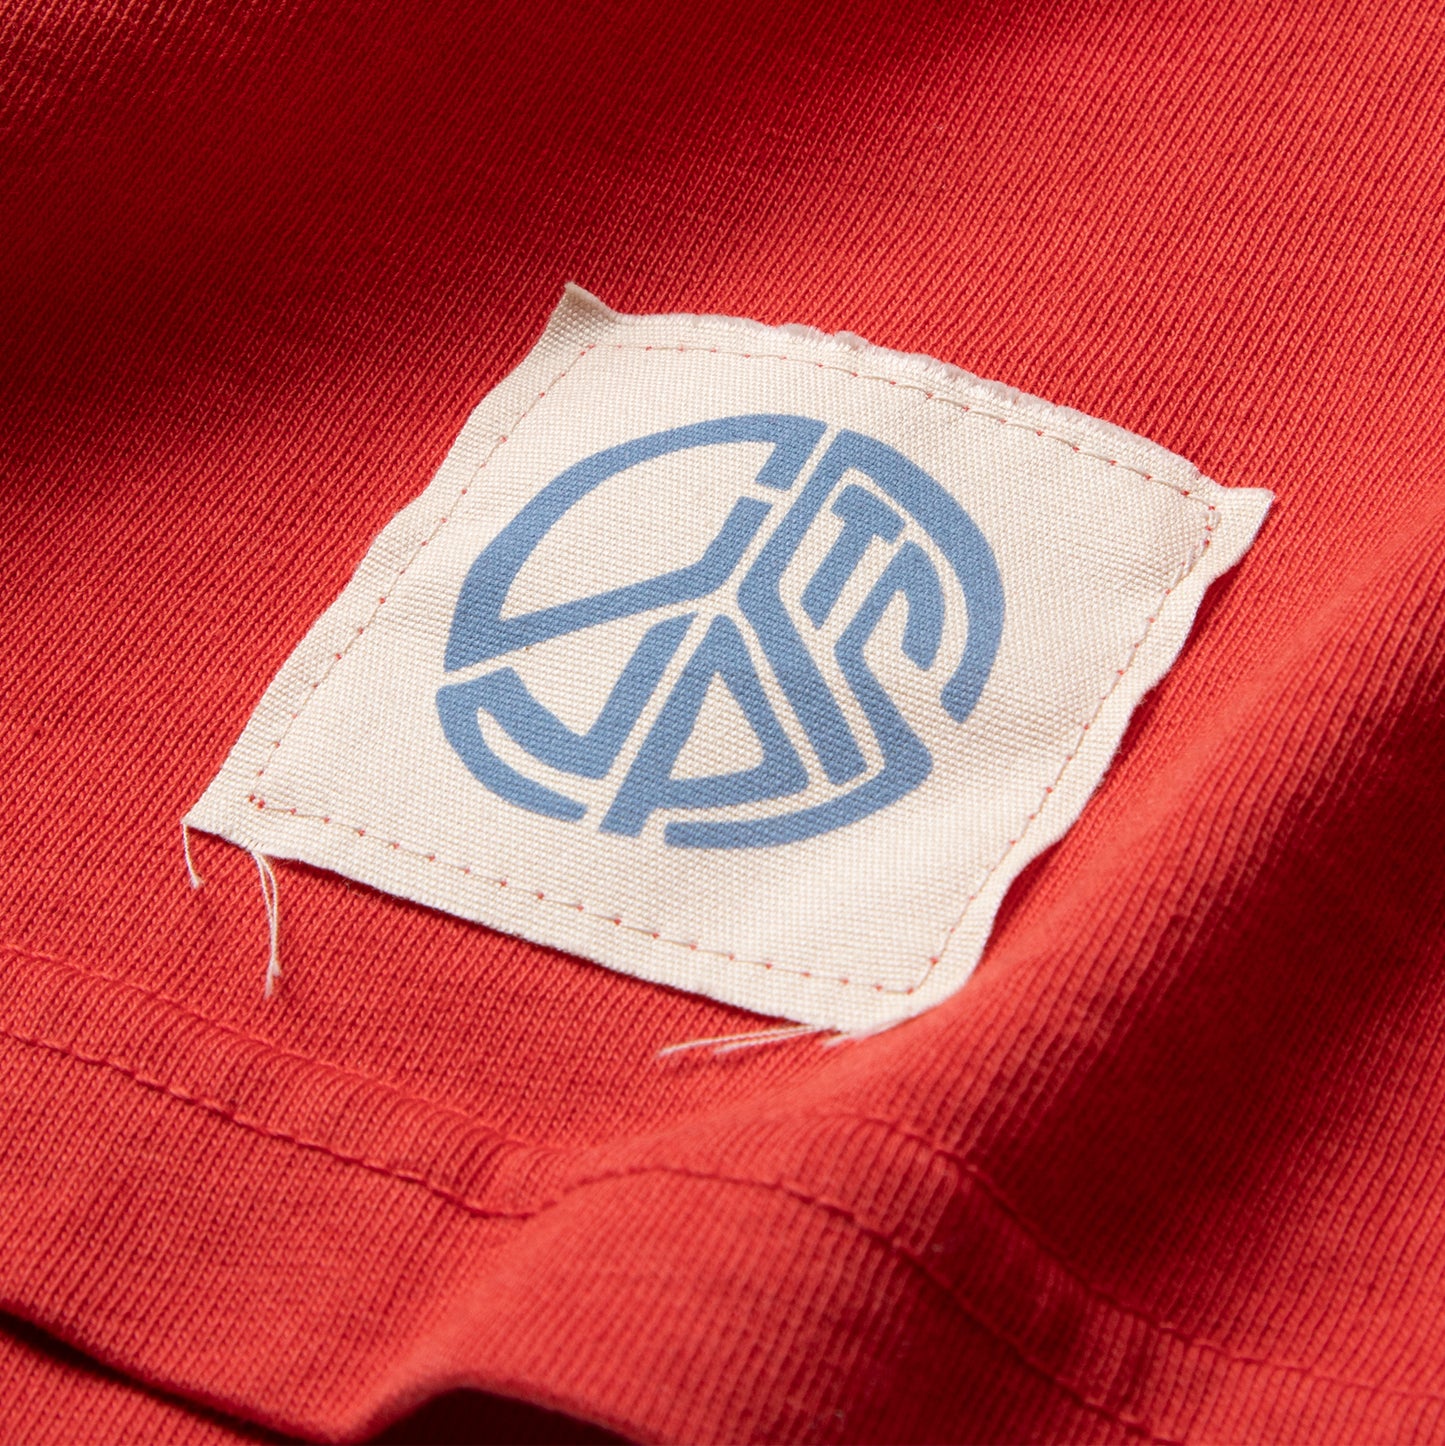 Concepts Patch Tee (Scarlet)